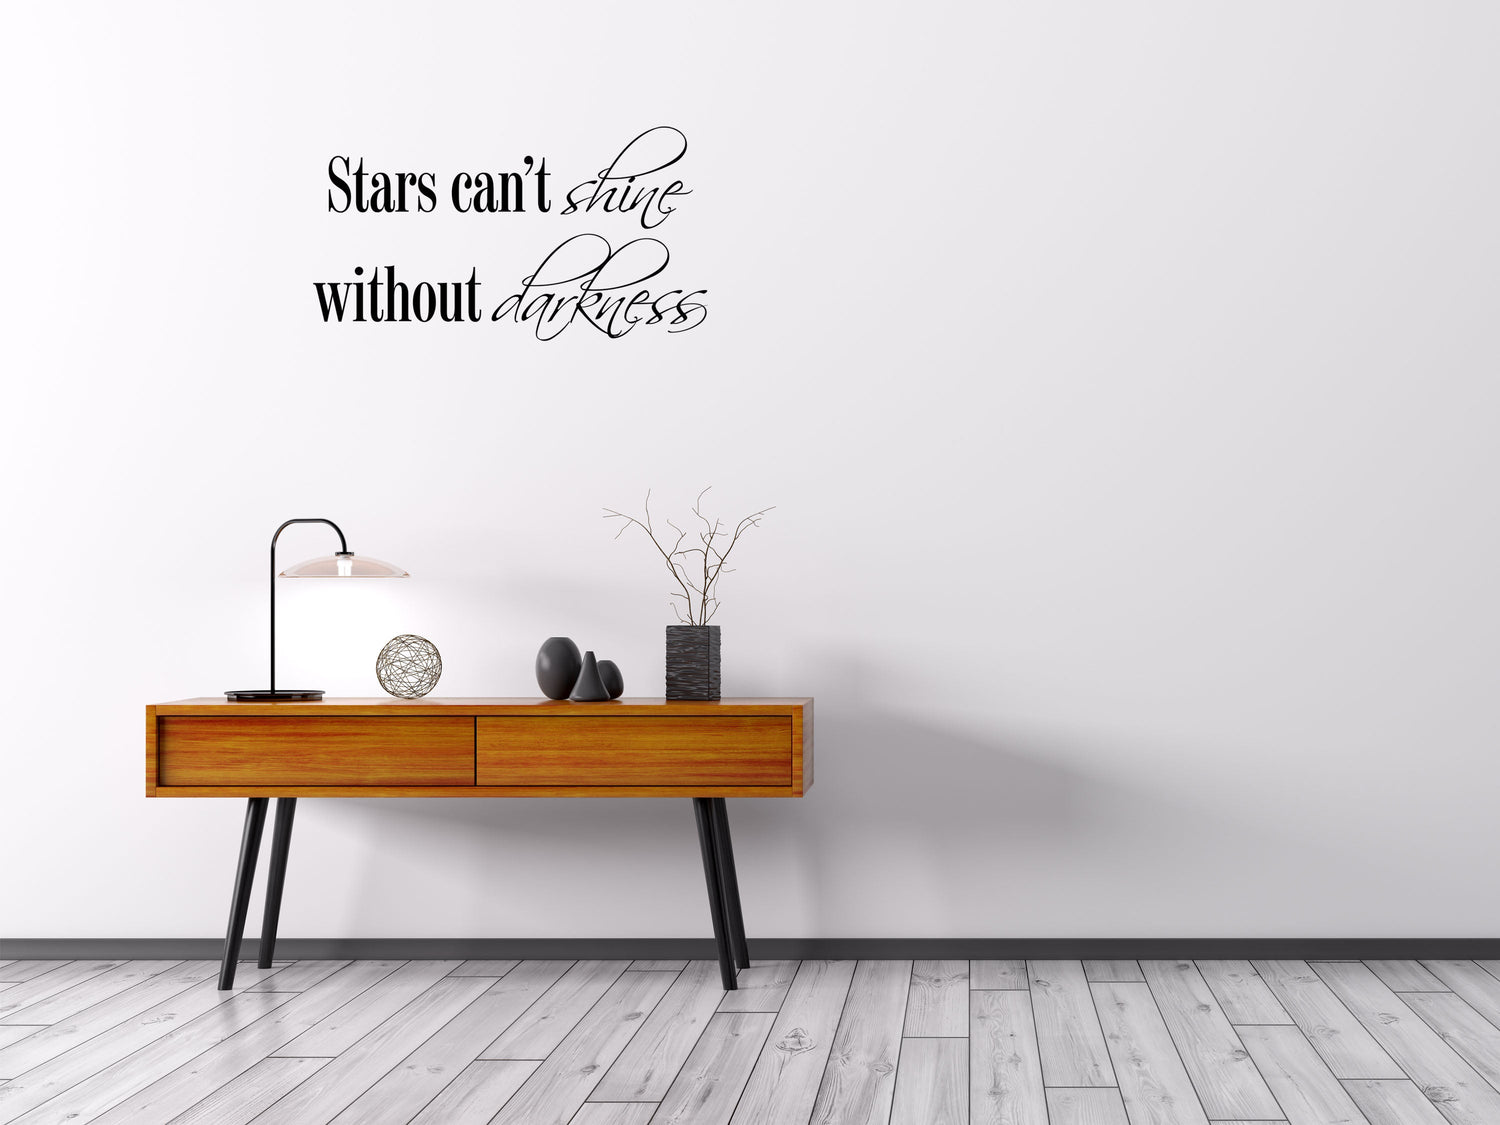 Stars Can't Shine Without Darkness - Inspirational Wall Decals Vinyl Wall Decal Inspirational Wall Signs 